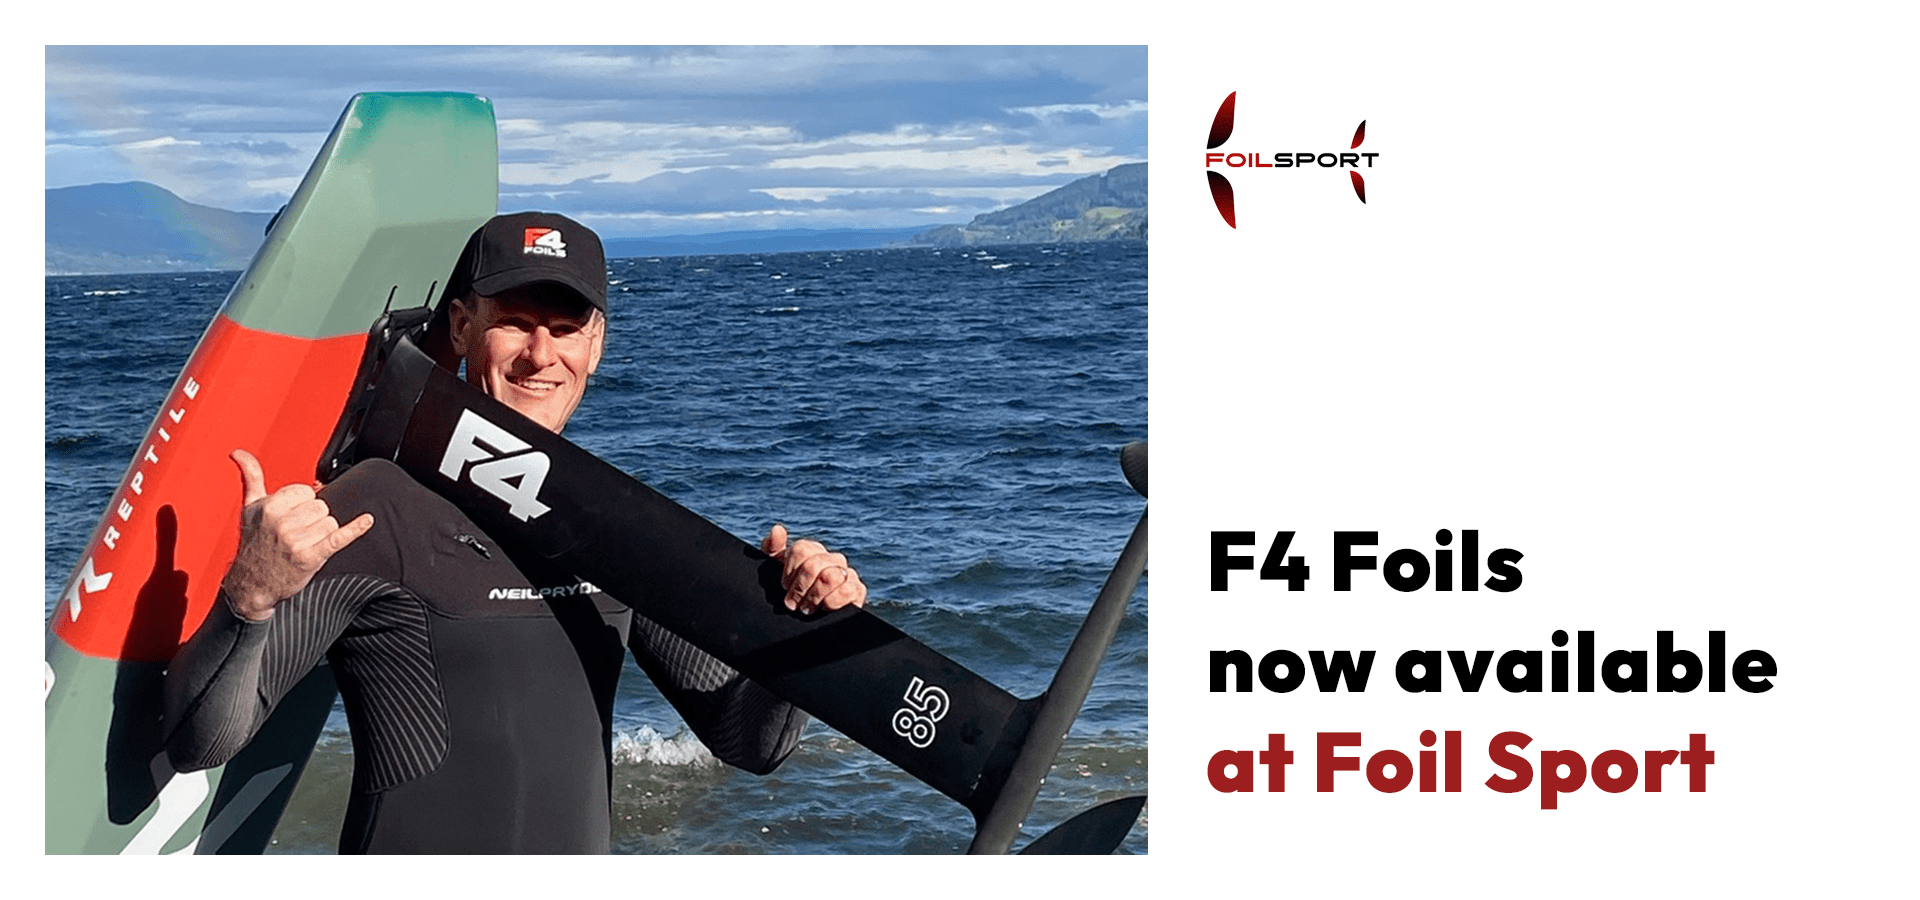 Foil Sport New partnership with Foil Sport in Norway